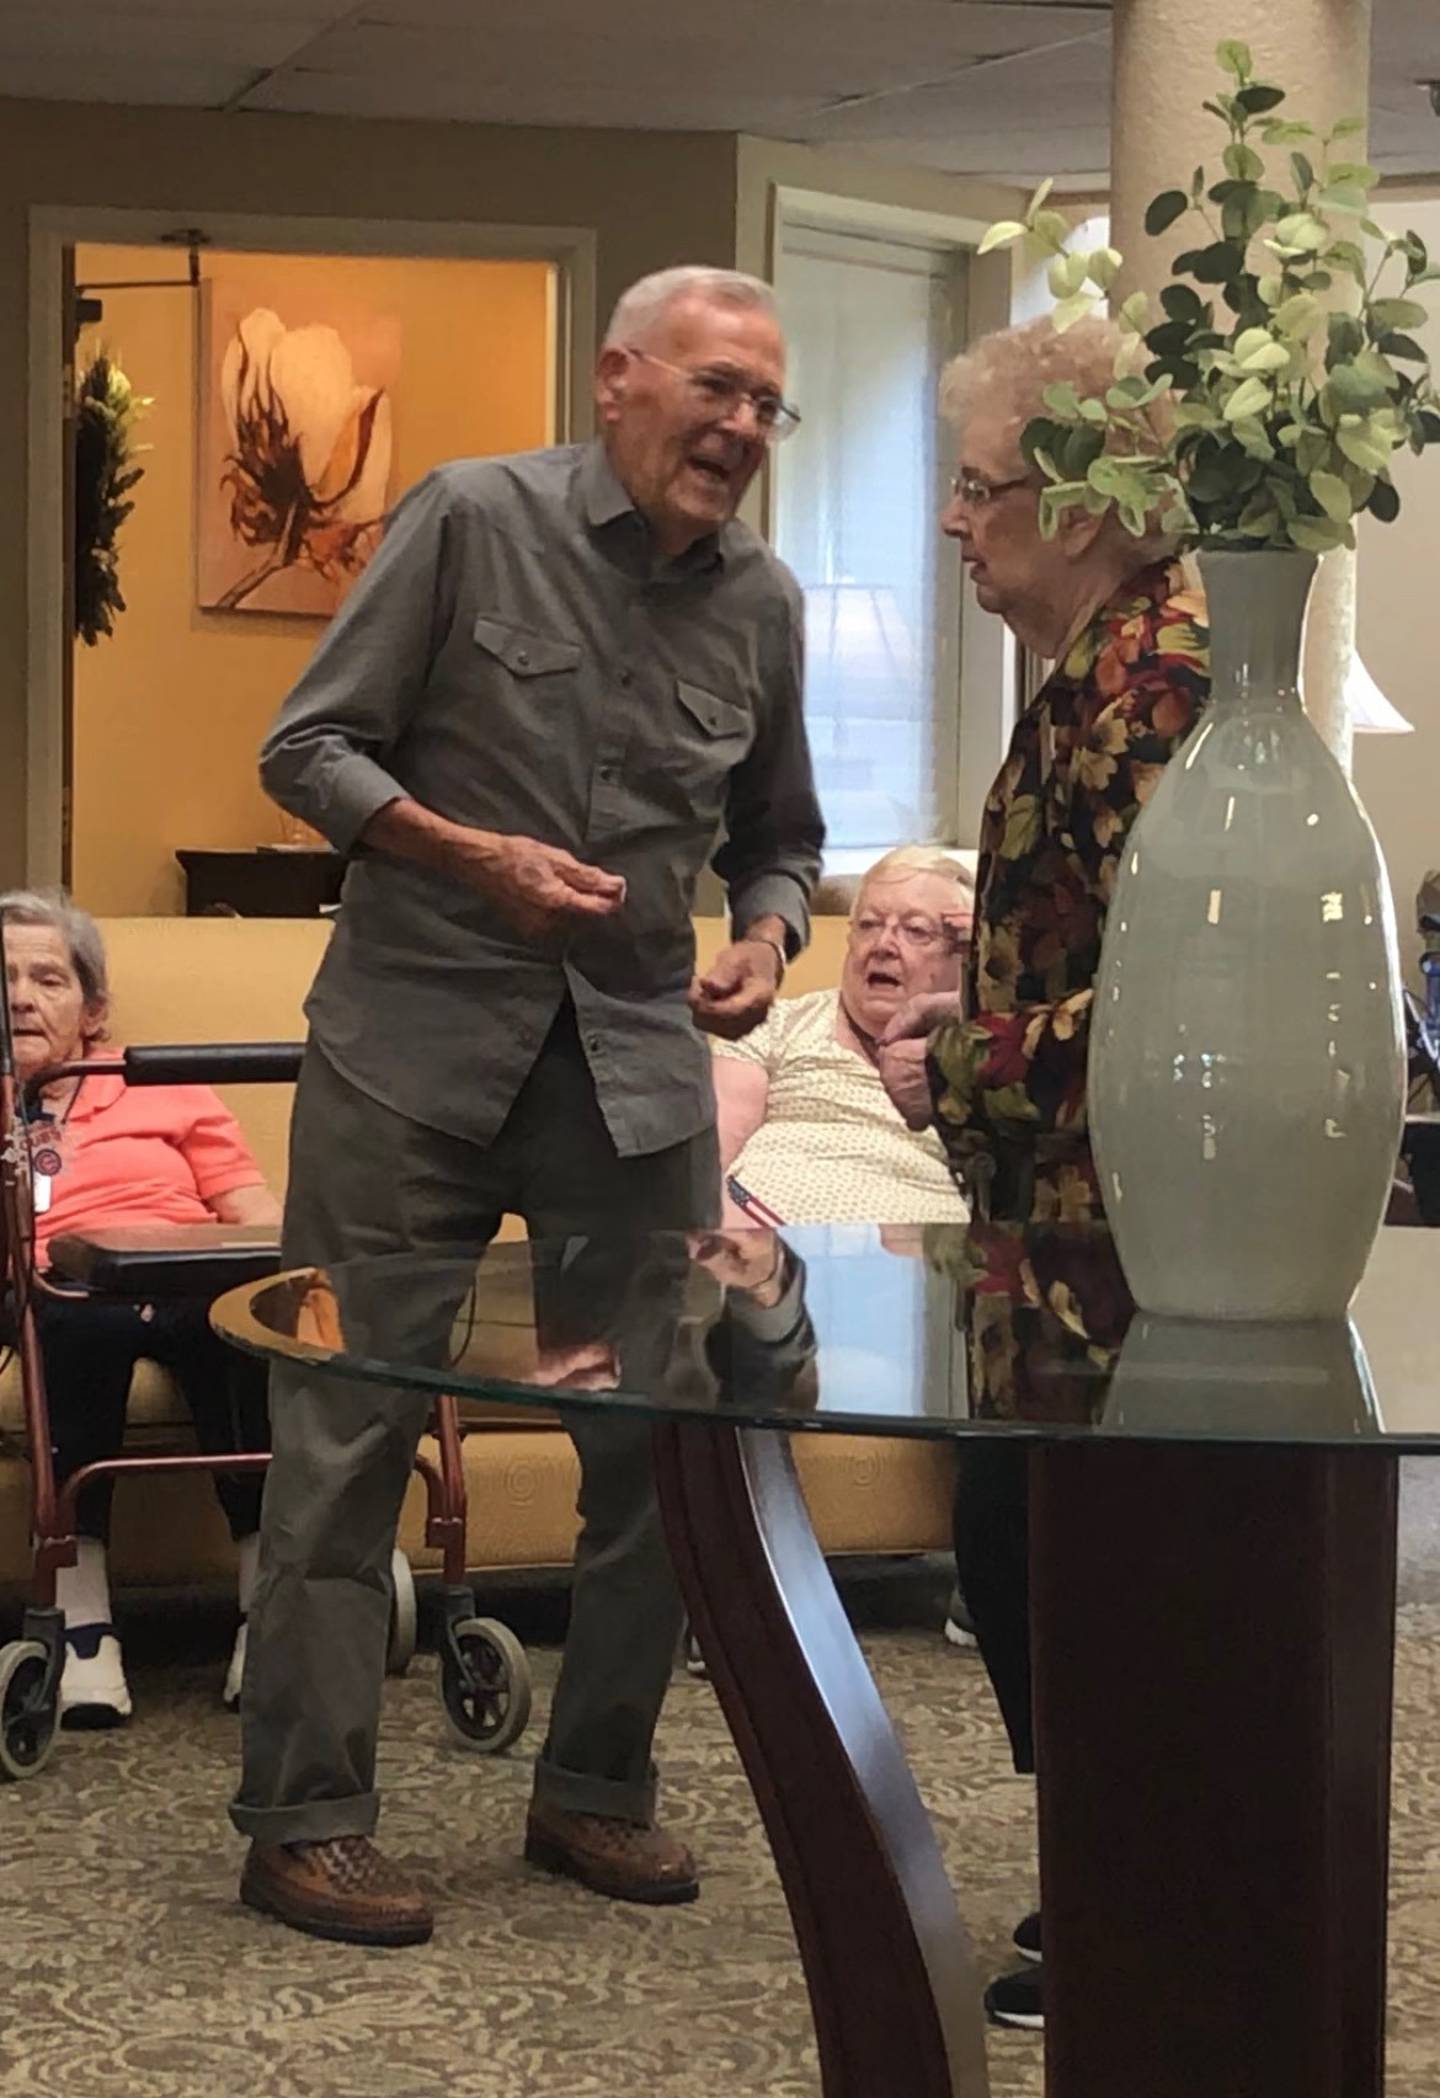 At Solstice Senior Living in Joliet, Glenn Masek was always the first one on the dance floor whenever the music started.